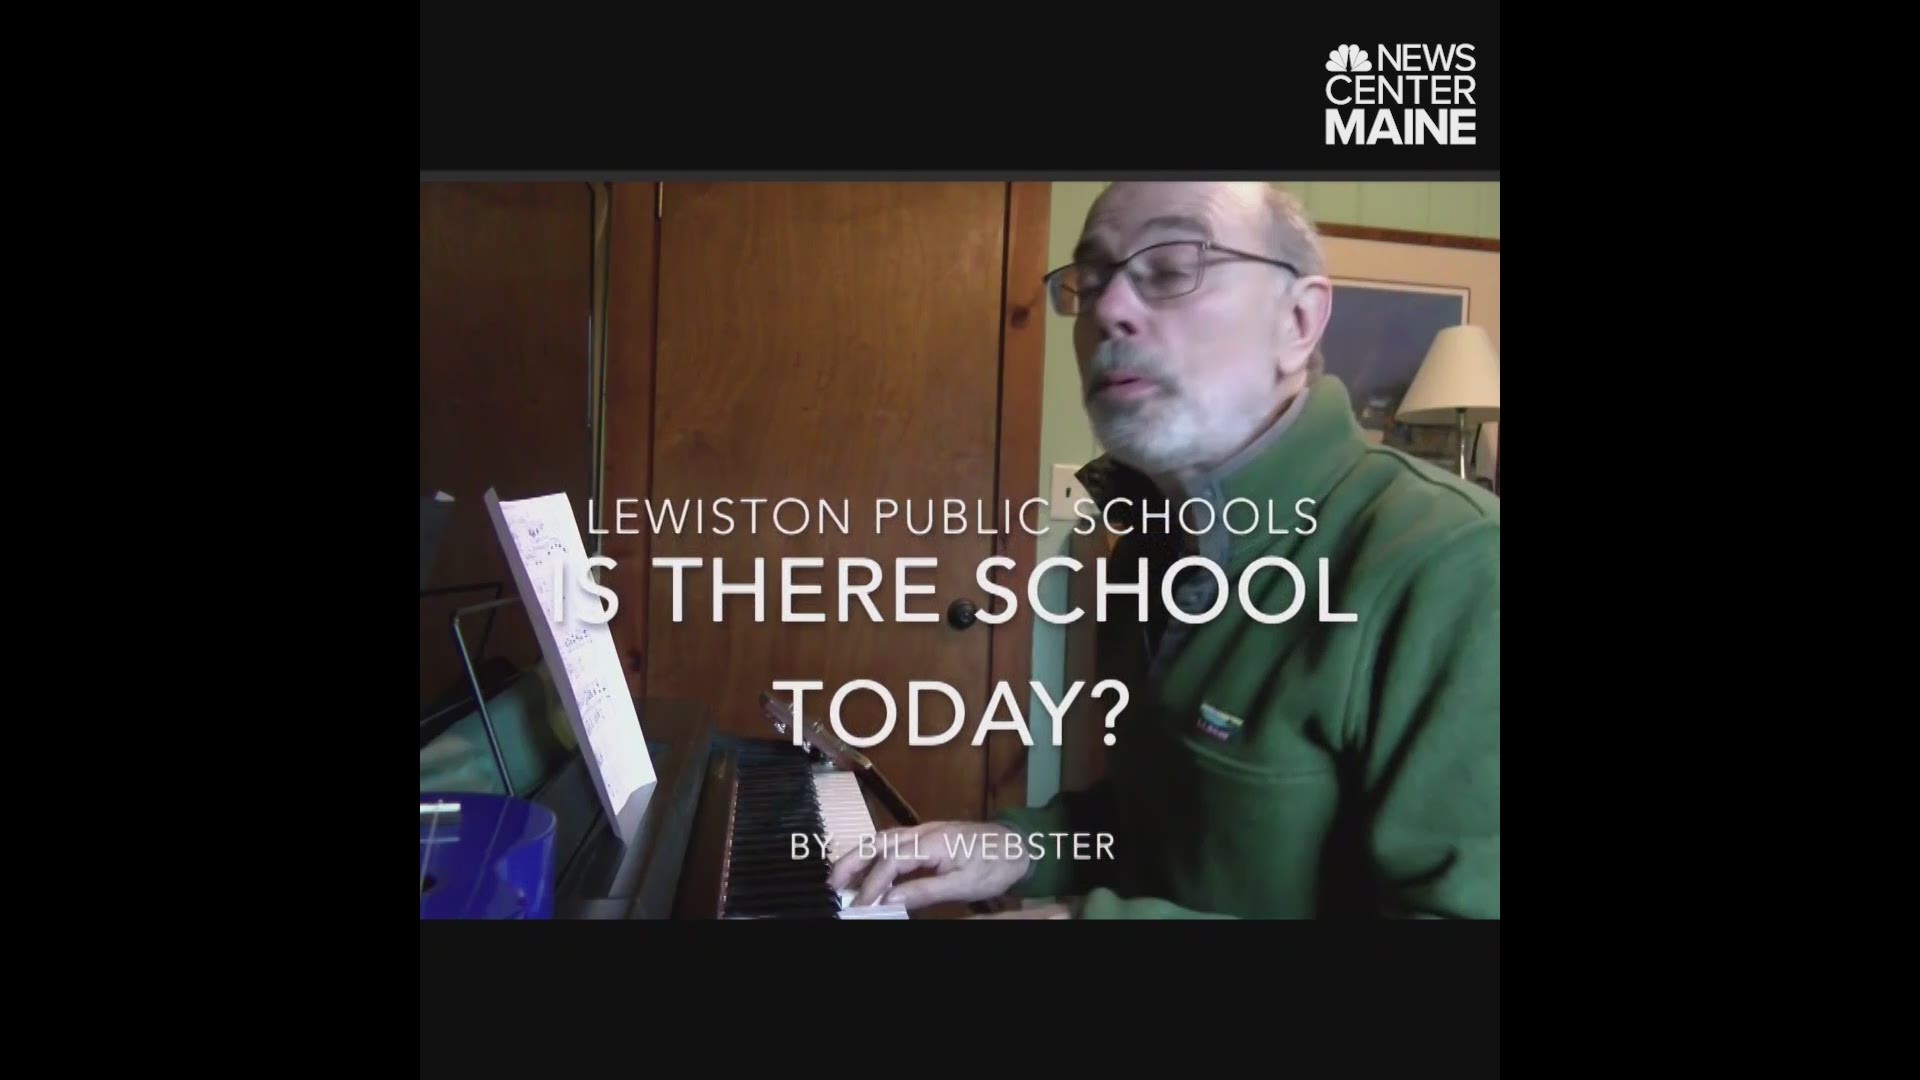 Lewiston superintendent Bill Webster turned into the music man, a real-life one man band Tuesday morning all in an effort to cancel school.